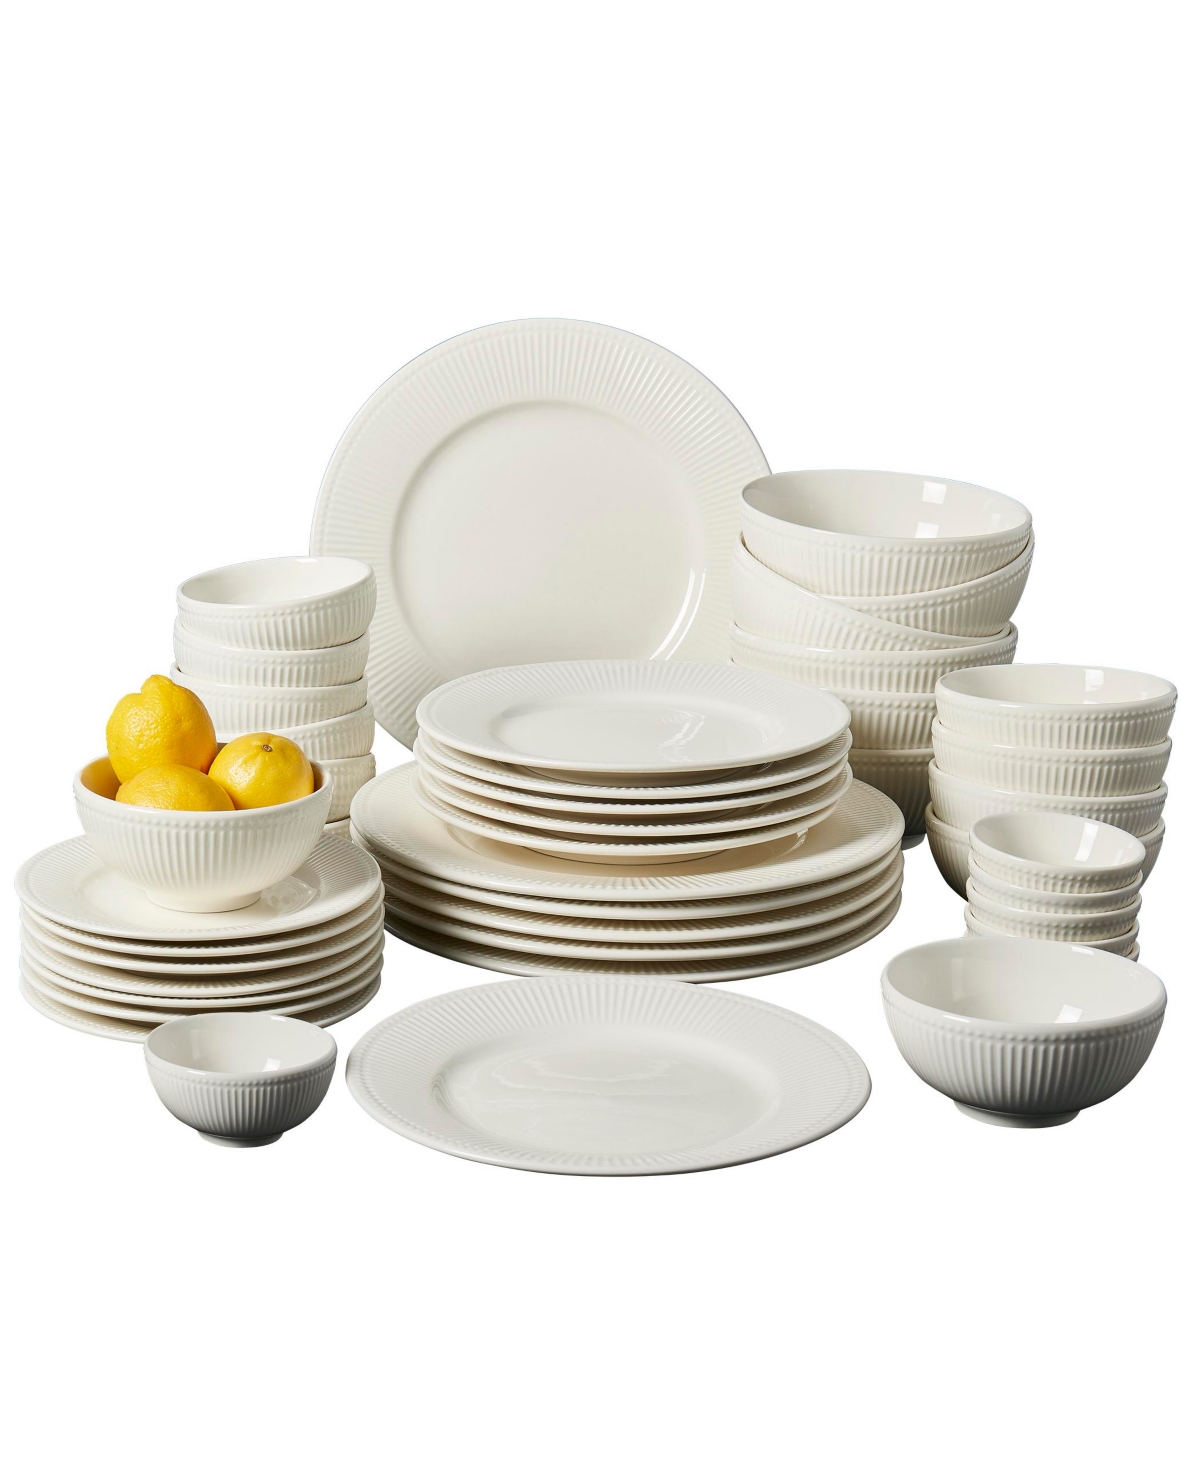 Inspiration by Denmark Fiore 42 Pc. Dinnerware Set, Service for 6, Created for Macy's - White